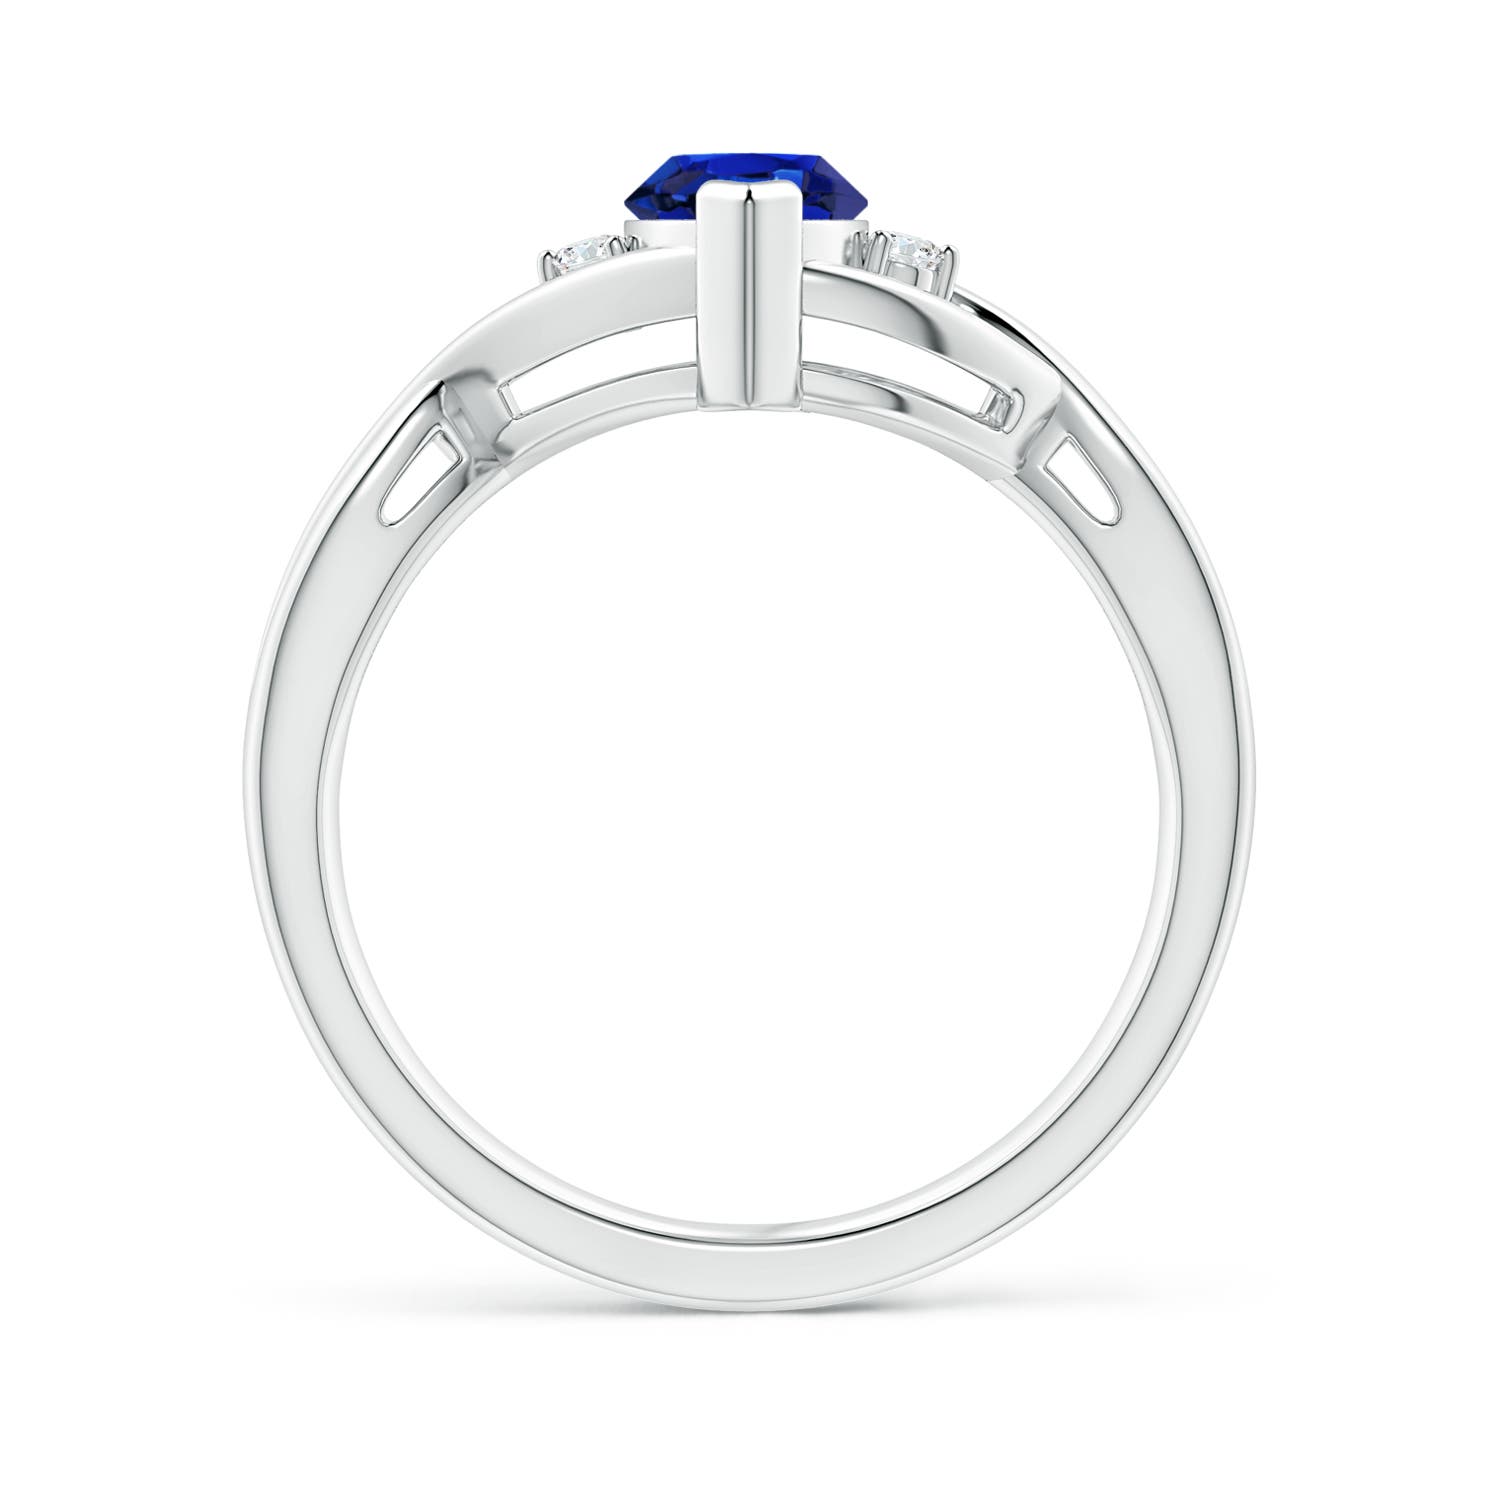 AAA - Blue Sapphire / 1.18 CT / 14 KT White Gold